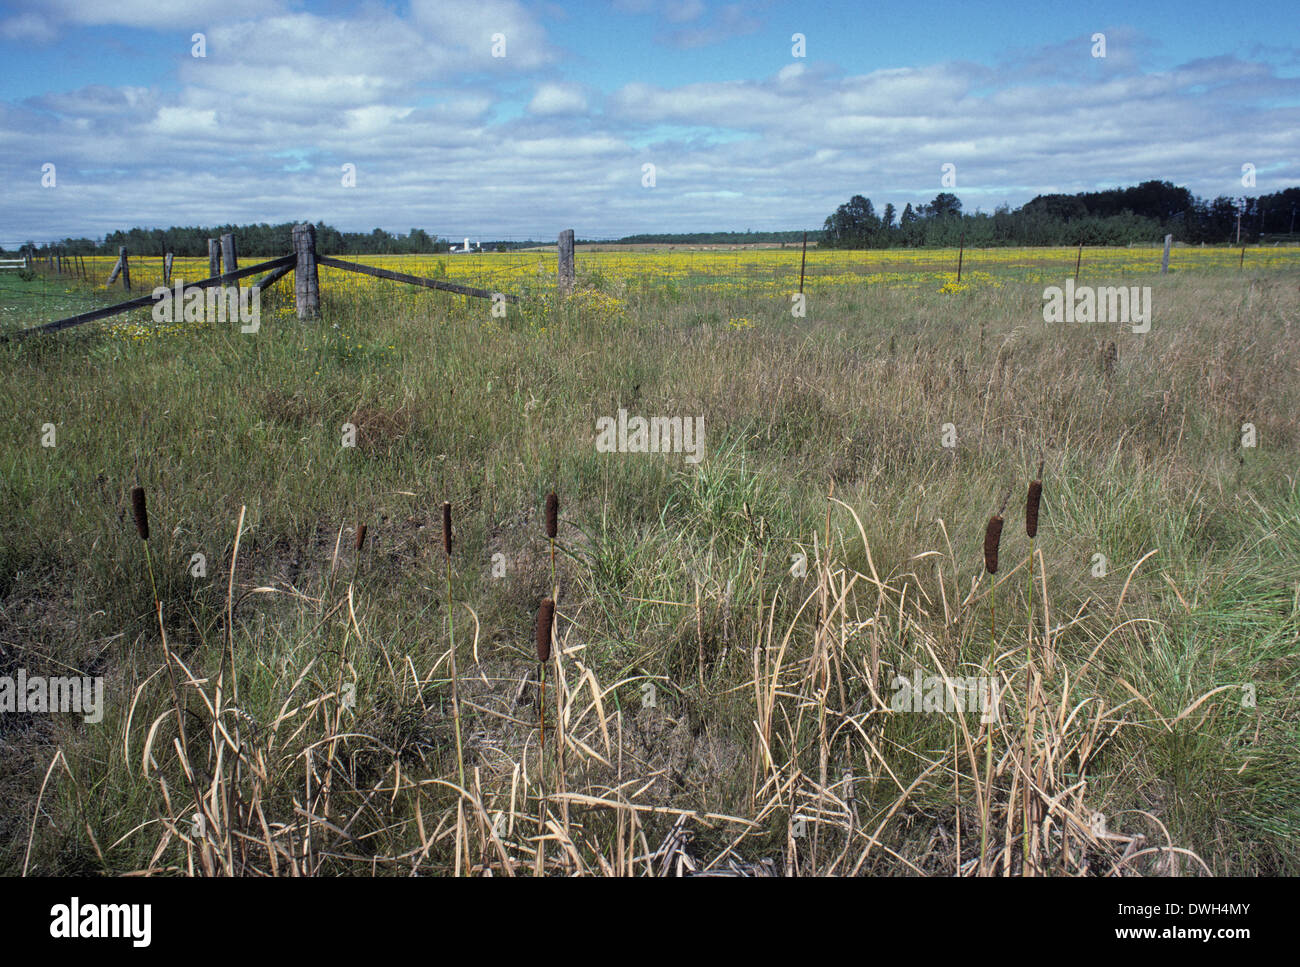 Bulrushes and buttercups field, Sault Sainte Marie, Ontario, Canada Stock Photo